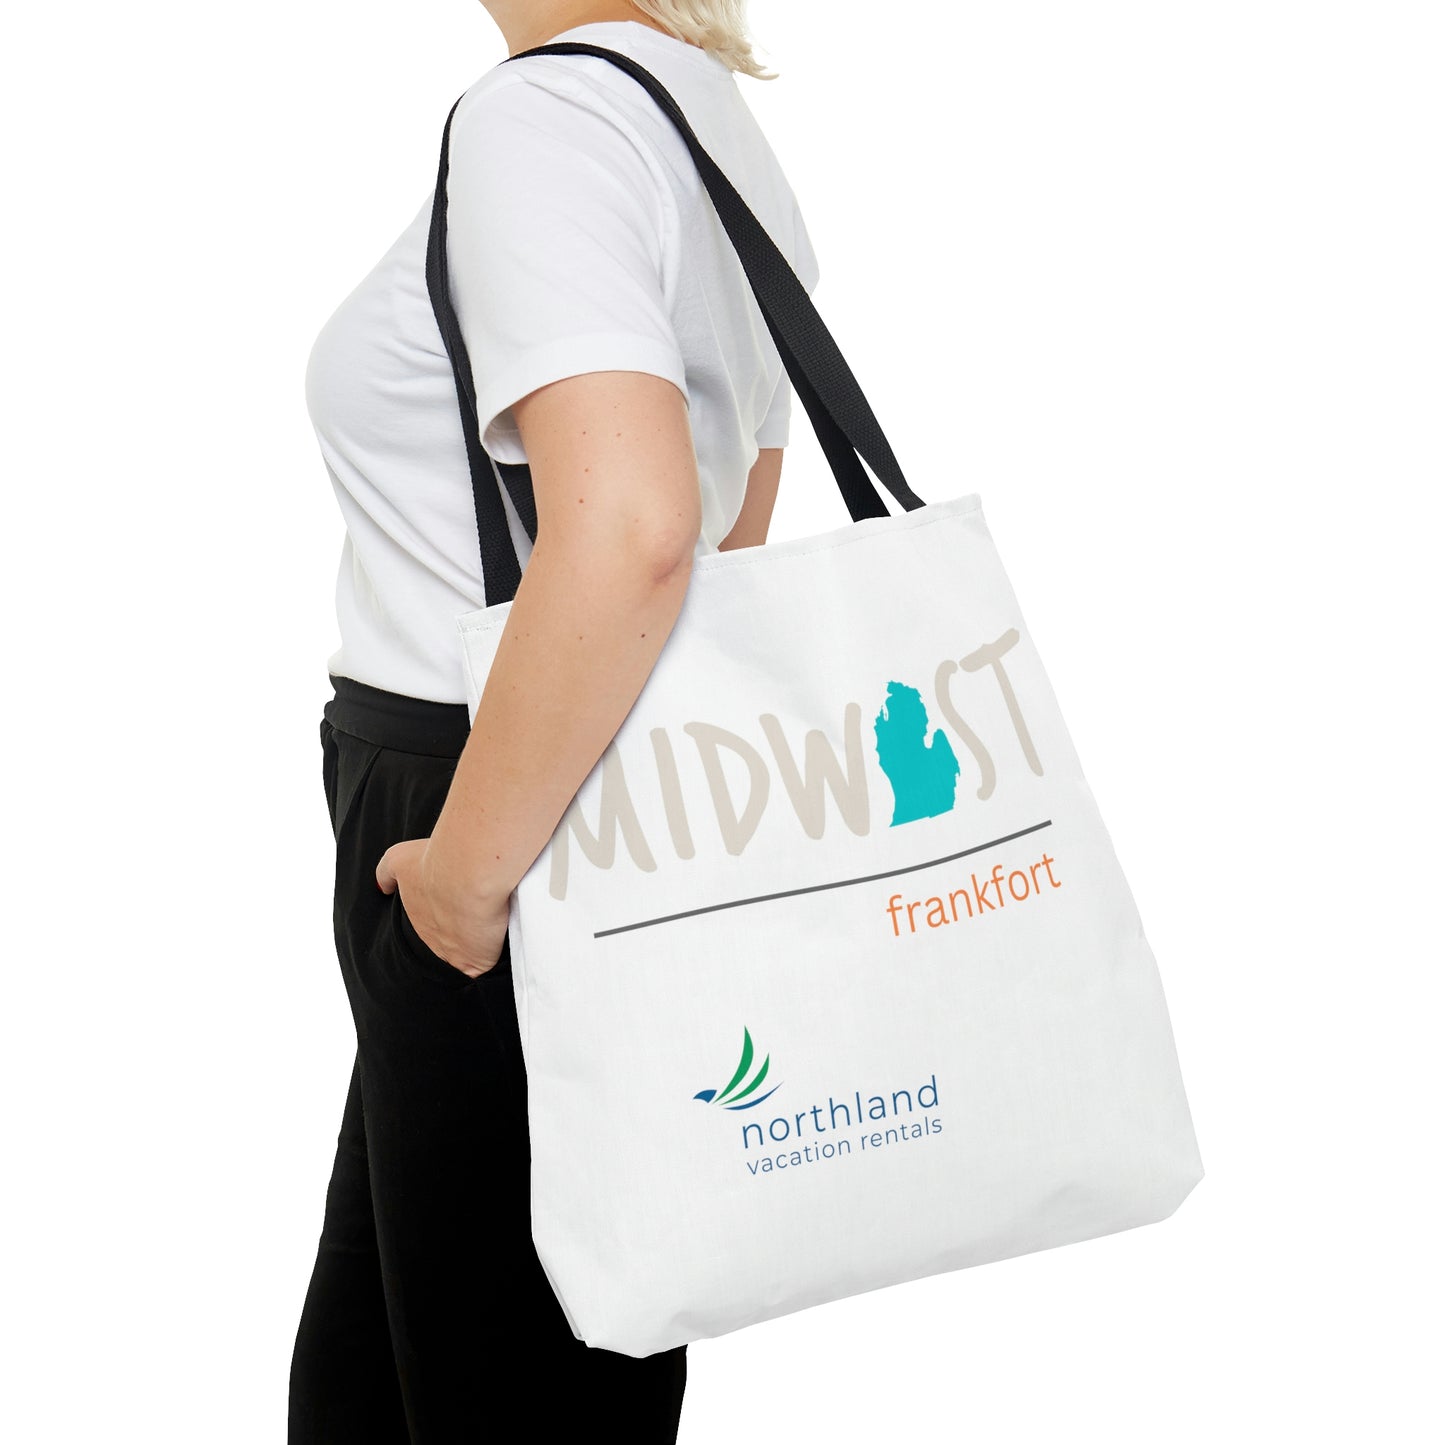 Michigan Midwest Frankfort 'Look Sharp' Tote/Northland VR